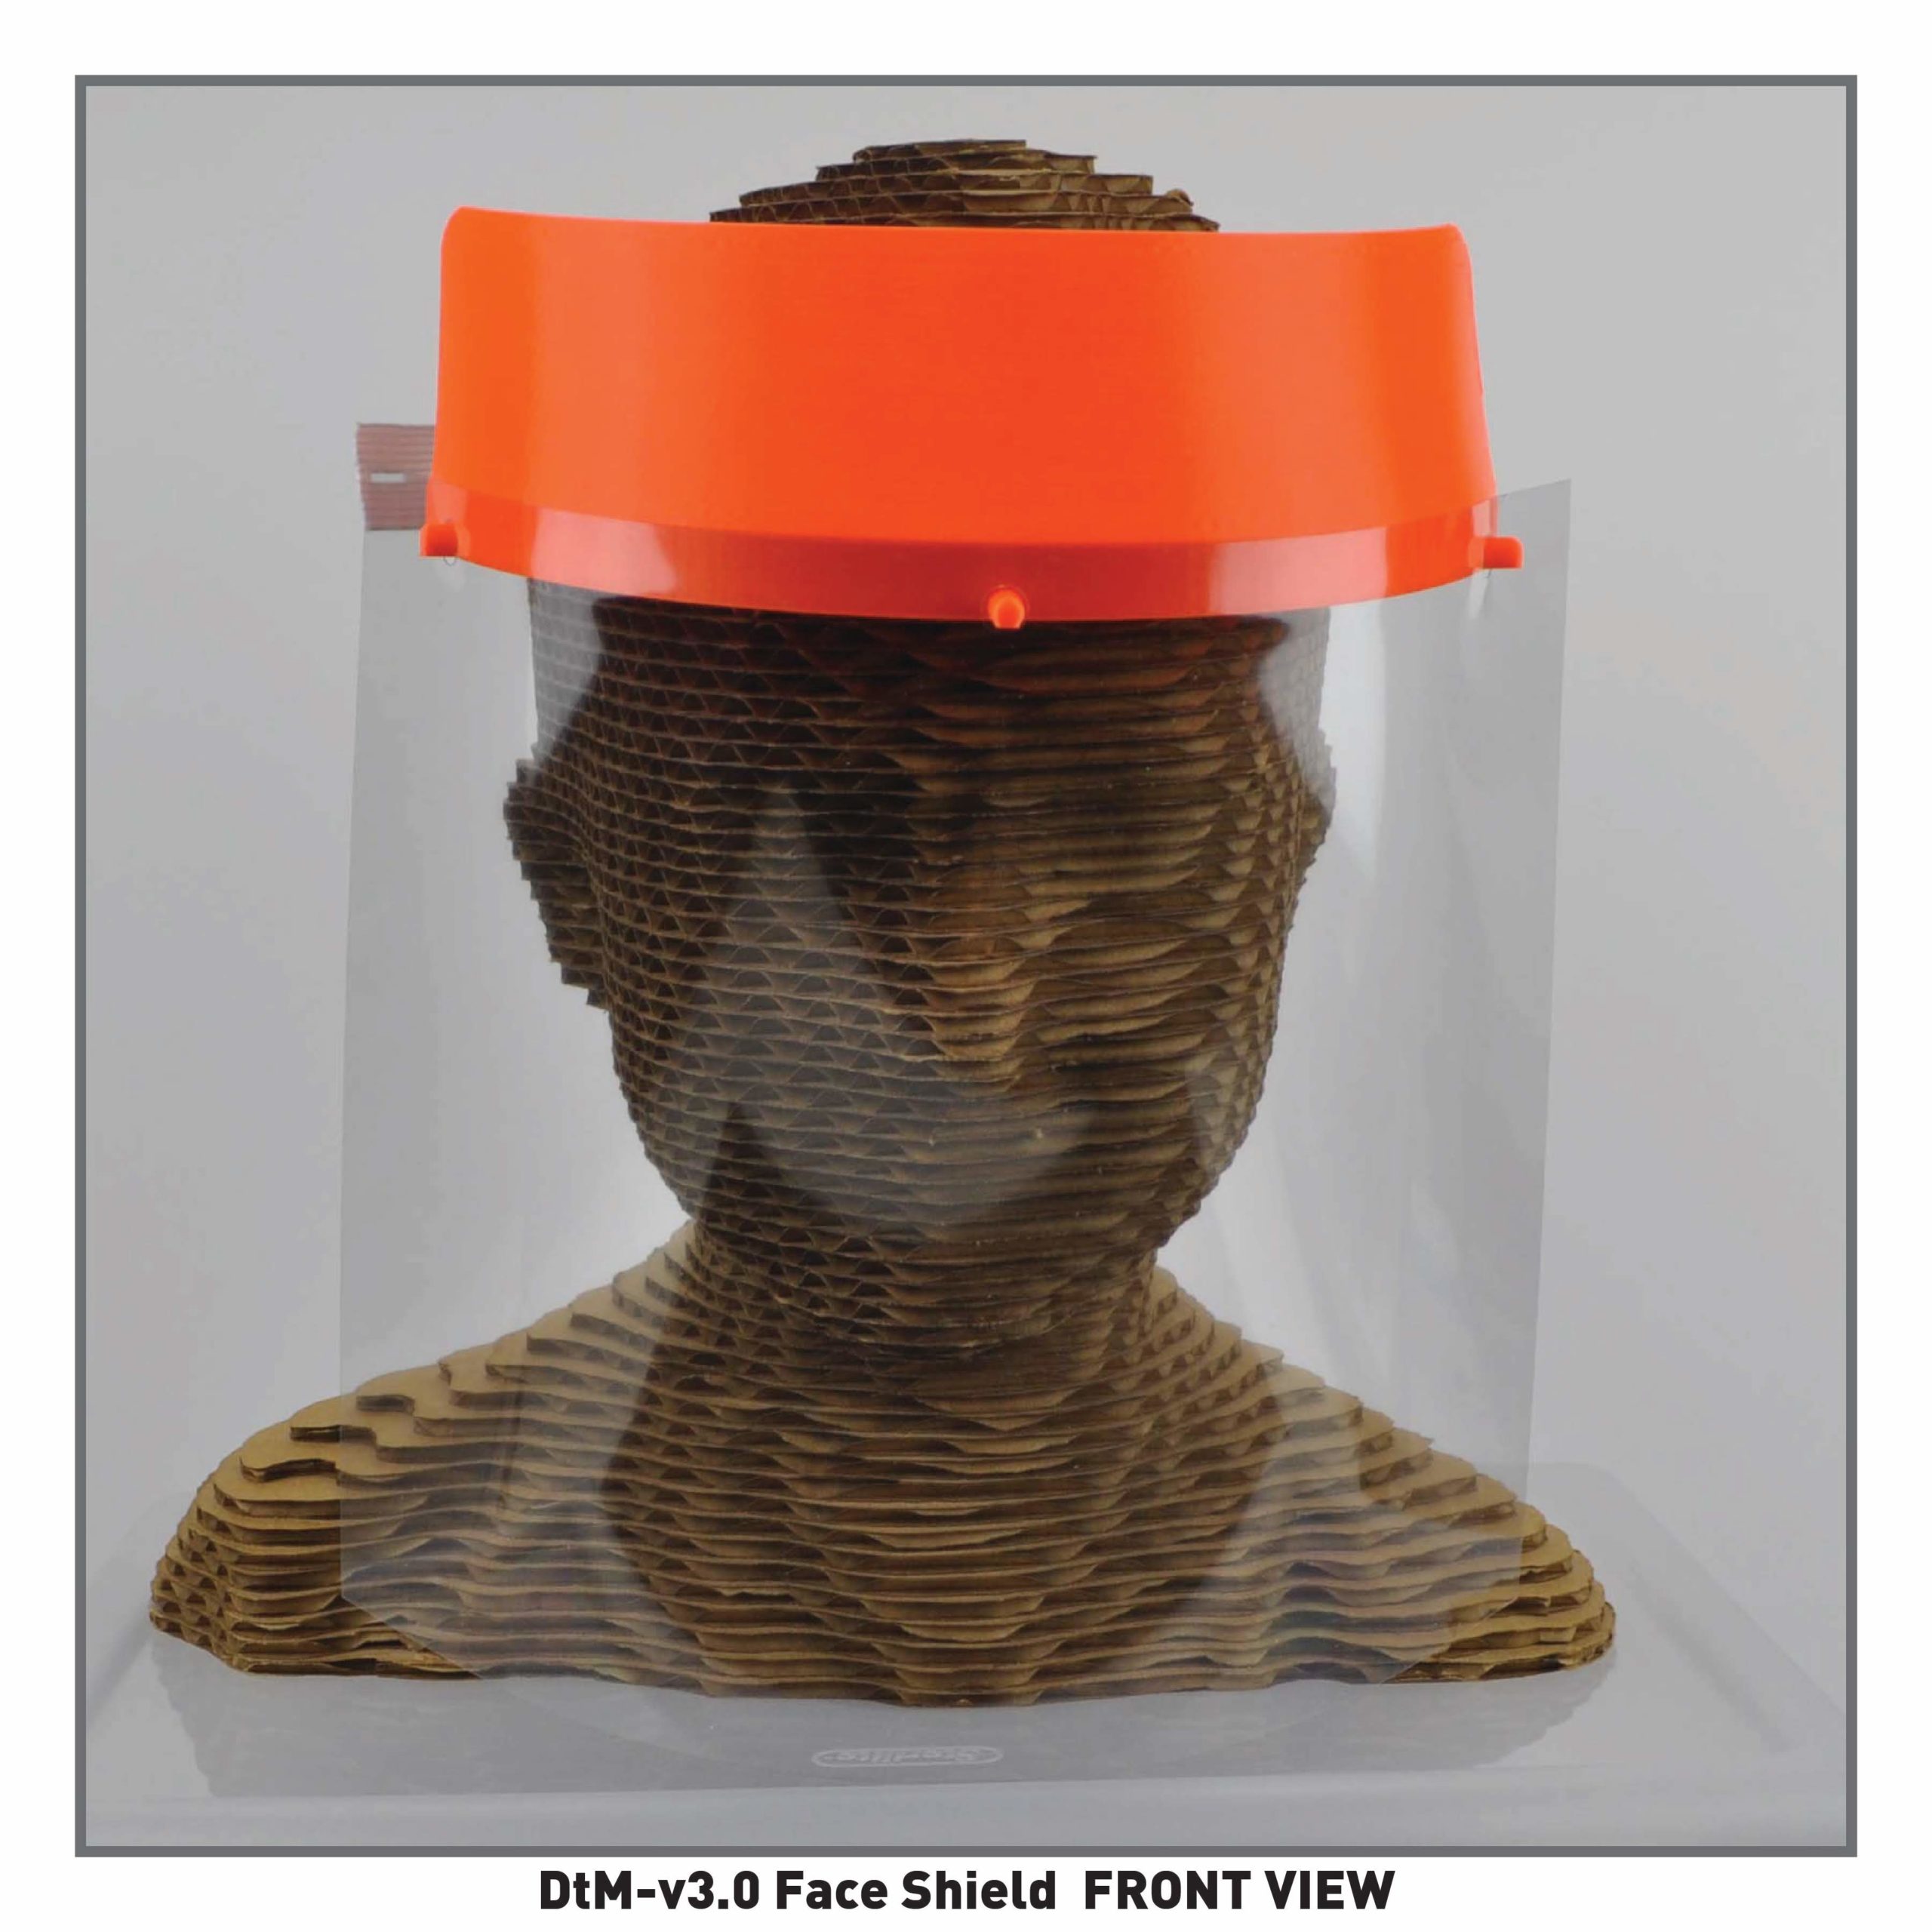 A mannequin head wears a face shield with a large orange headband connected to a curved clear piece of plastic that extends from the forehead to below the collar bone. The image is captioned dtm version 3.0 face shield front view.